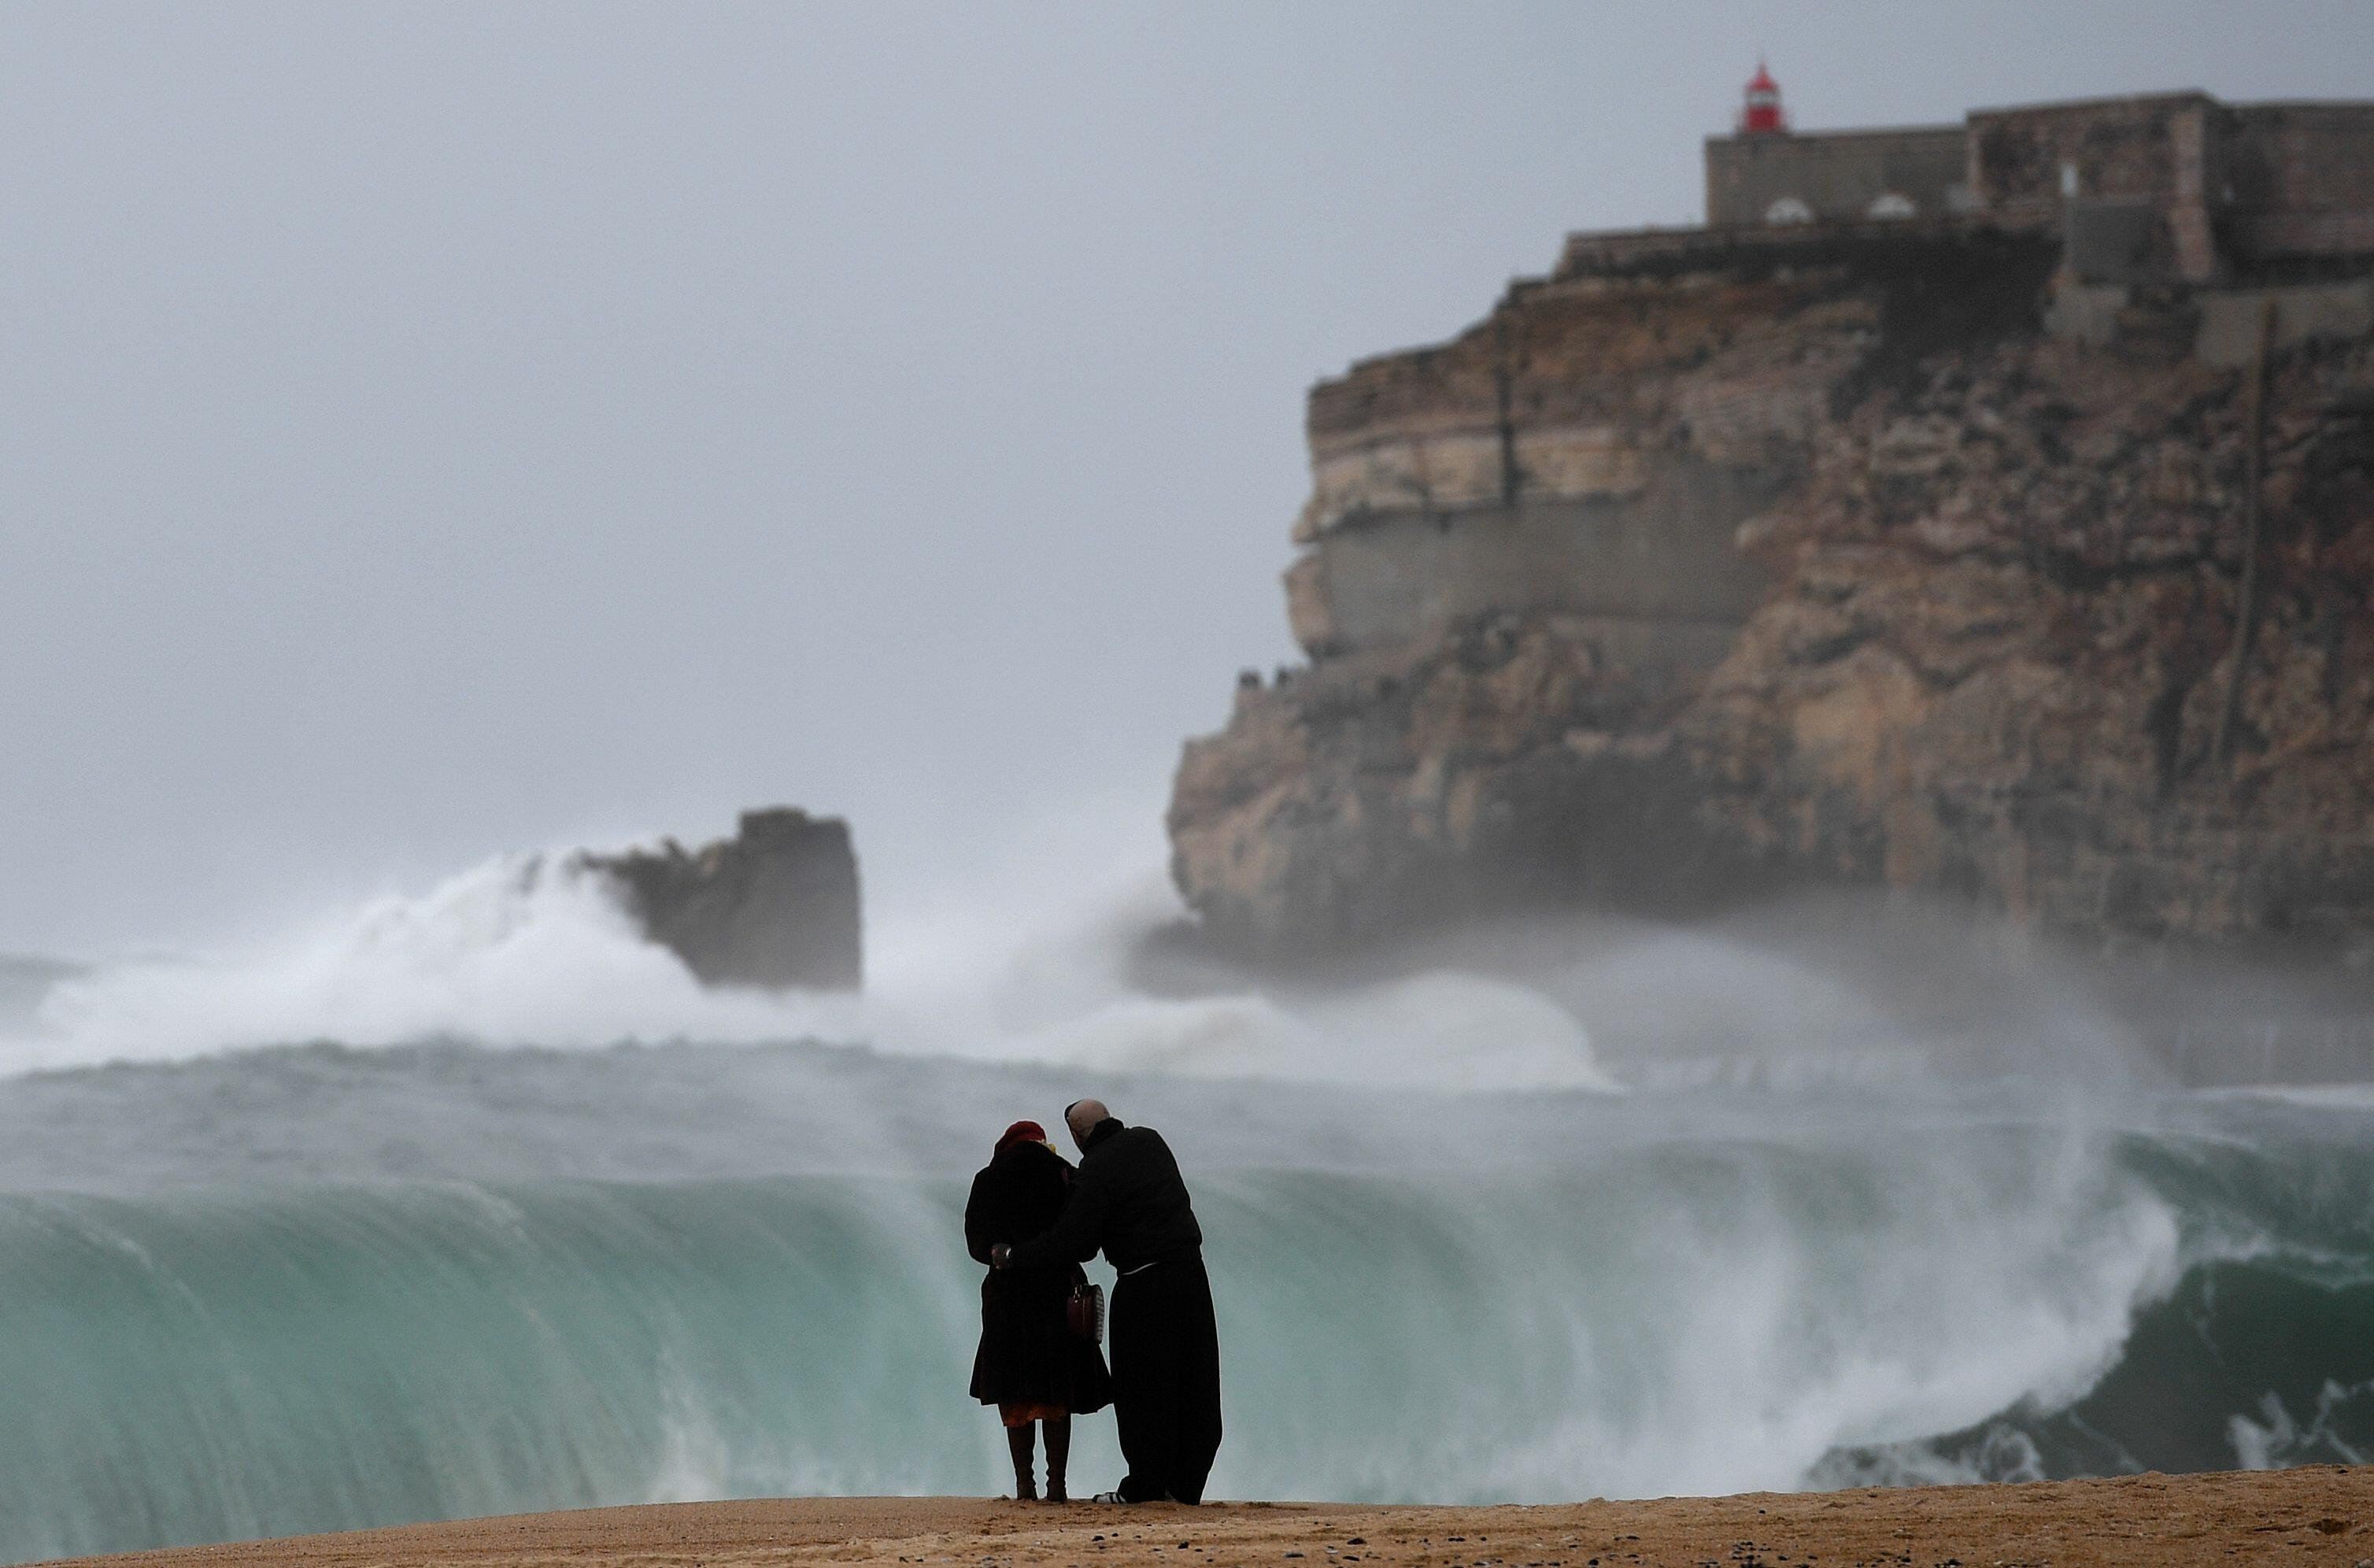 TOPSHOT - A couple stands on the beach as big waves break near the Sao Miguel Arcanjo fort in Nazare, central Portugal, on February 2, 2017. / AFP PHOTO / FRANCISCO LEONG        (Photo credit should read FRANCISCO LEONG/AFP/Getty Images)